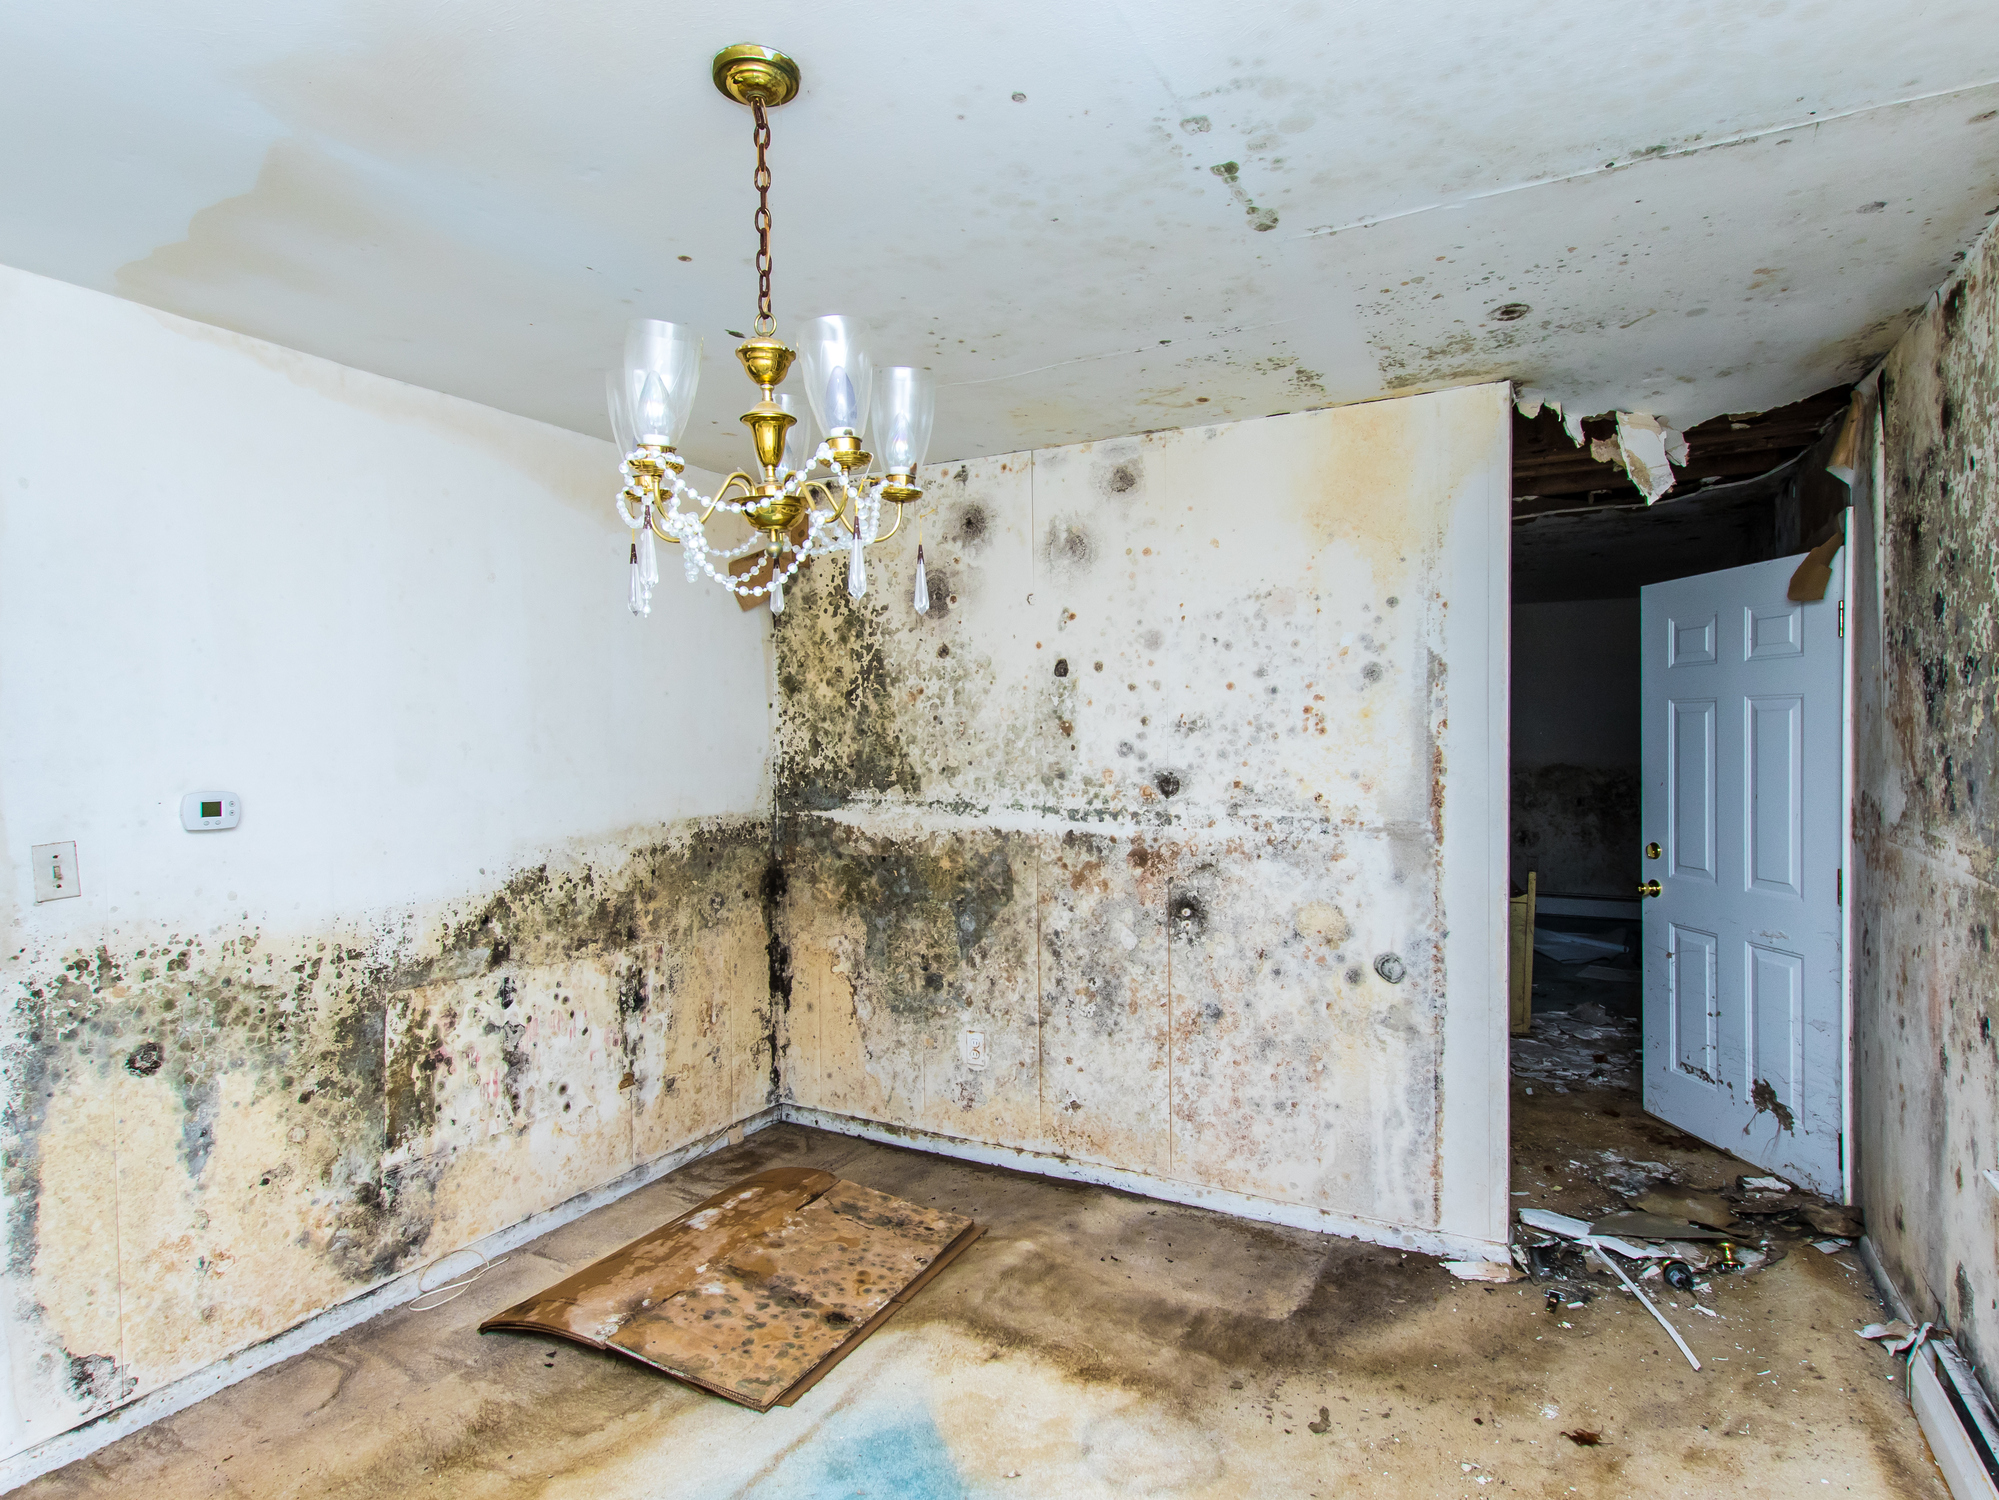 Mold growing throughout a home